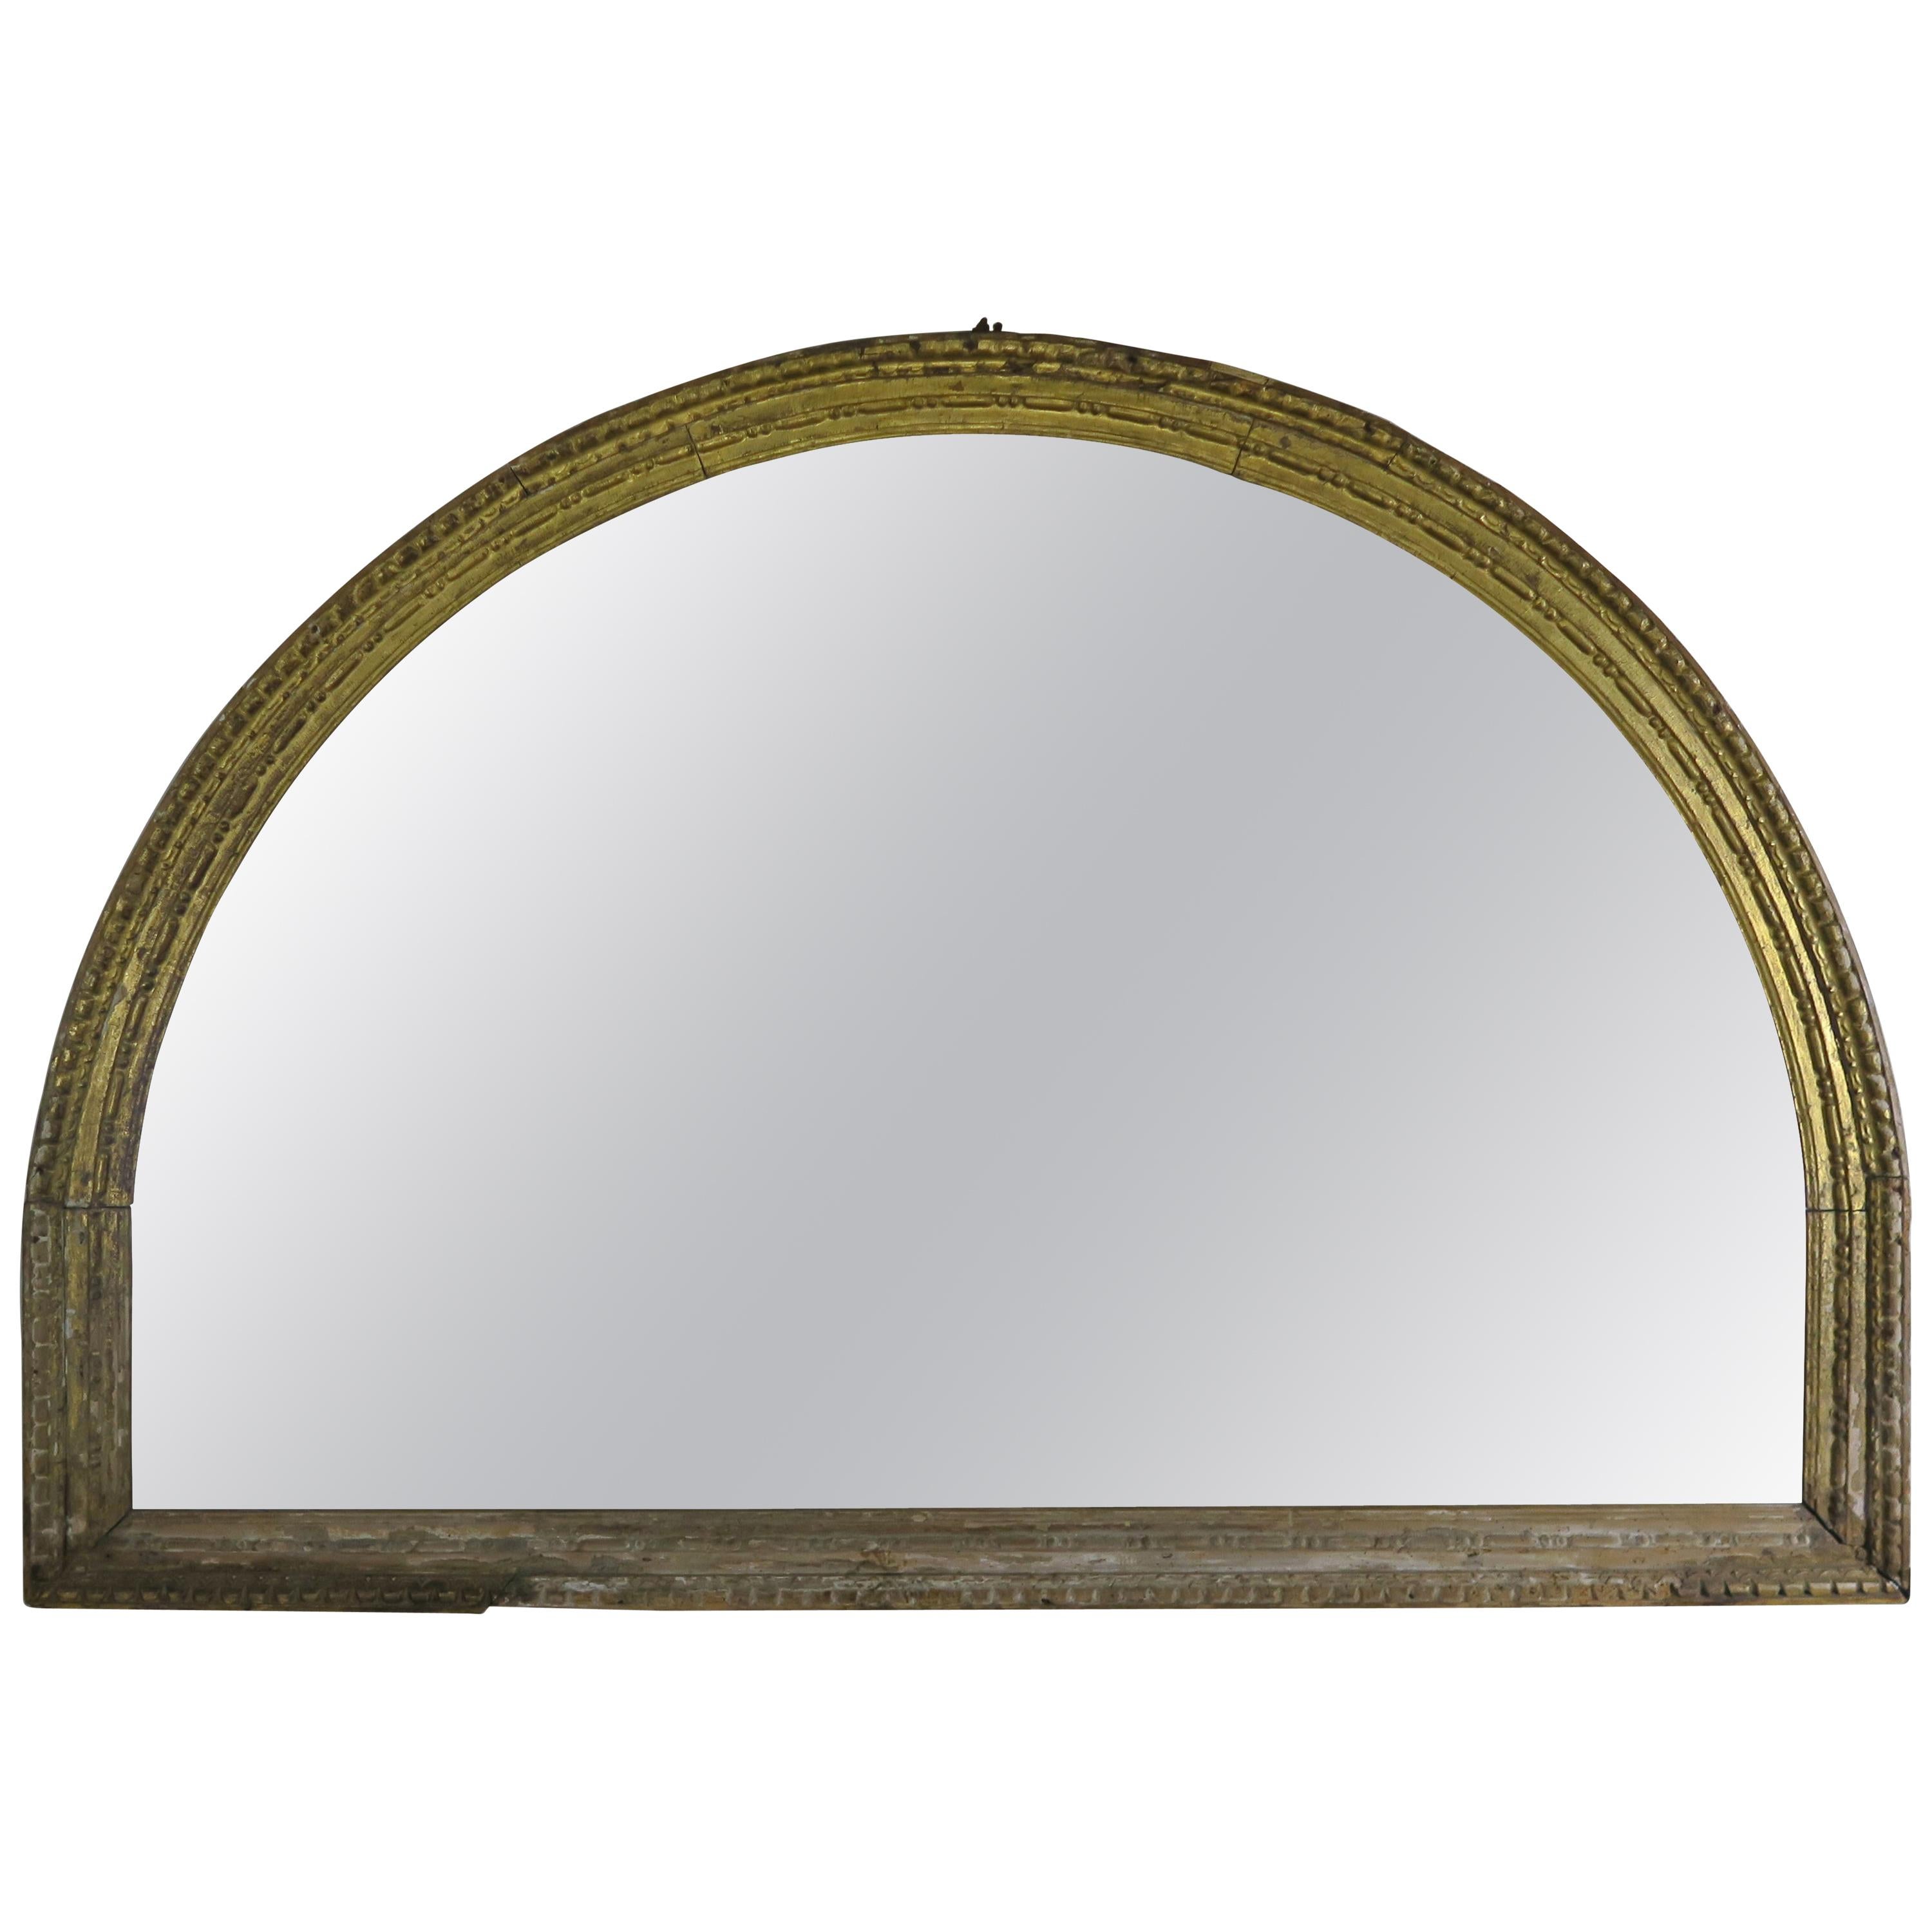 Early 19th Century Italian Giltwood Carved Arched Mirror